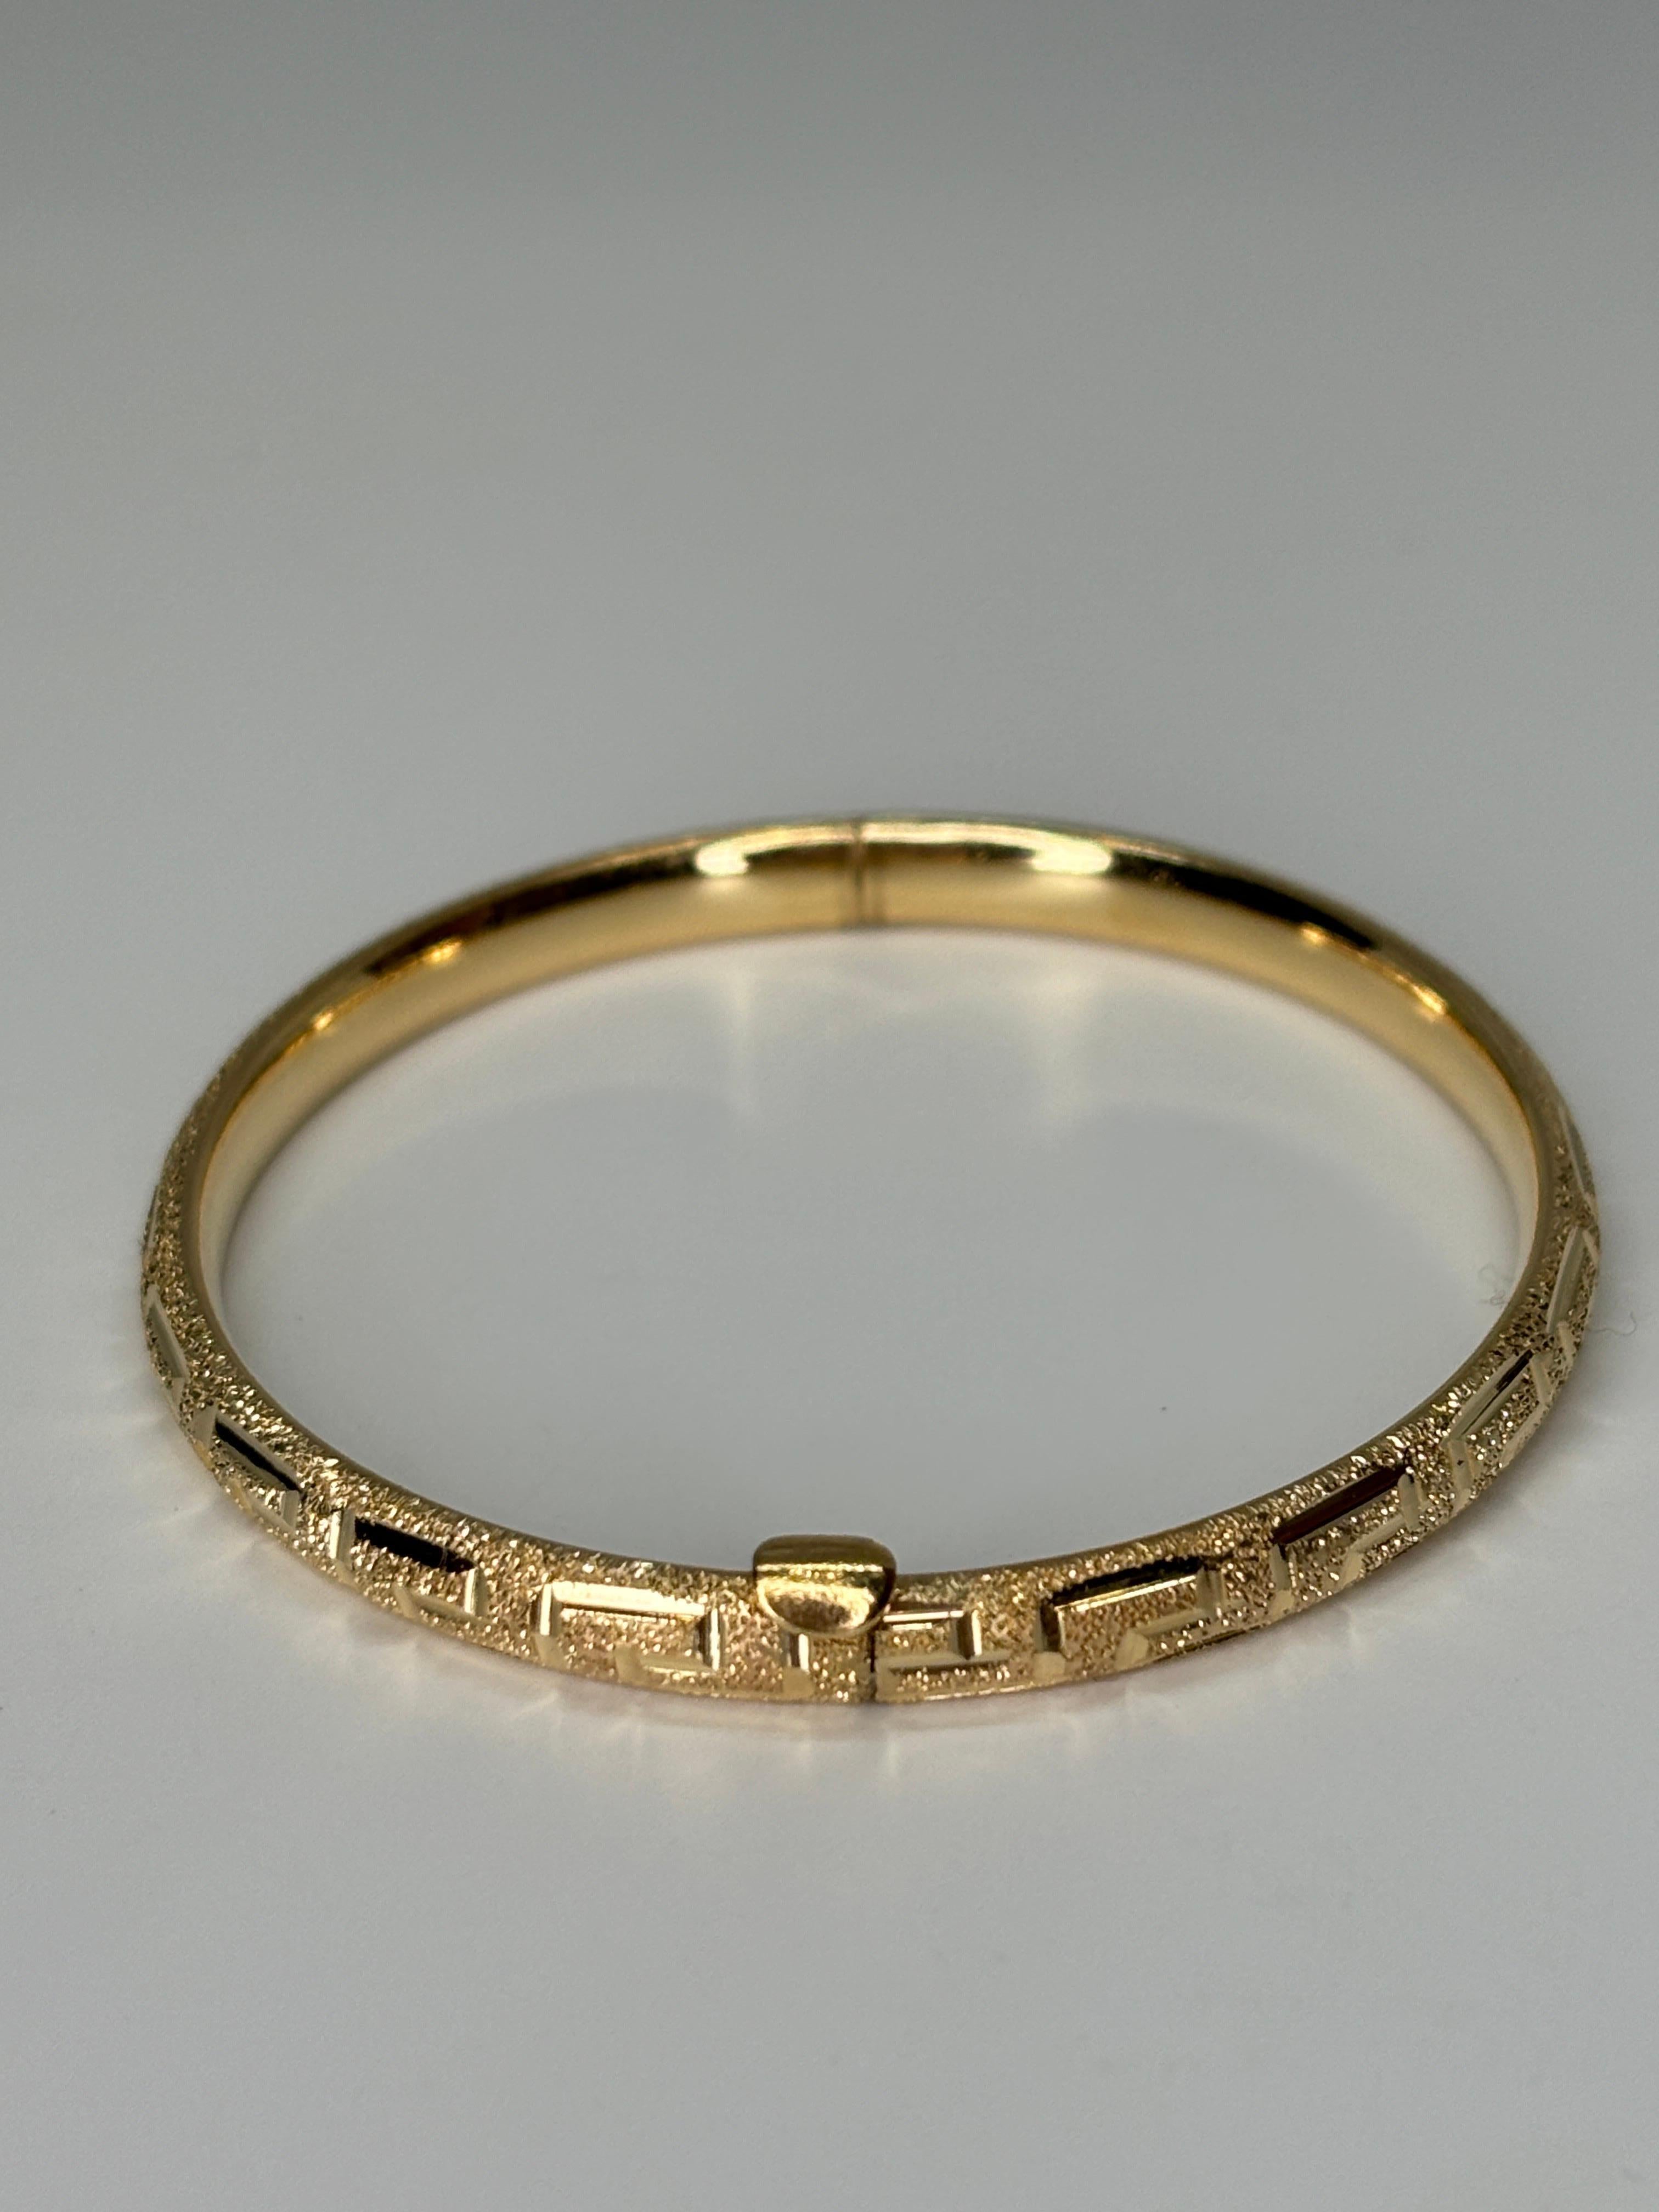 14k Yellow Gold Small Size or Childrens Greek Key Bangle Bracelet  For Sale 2